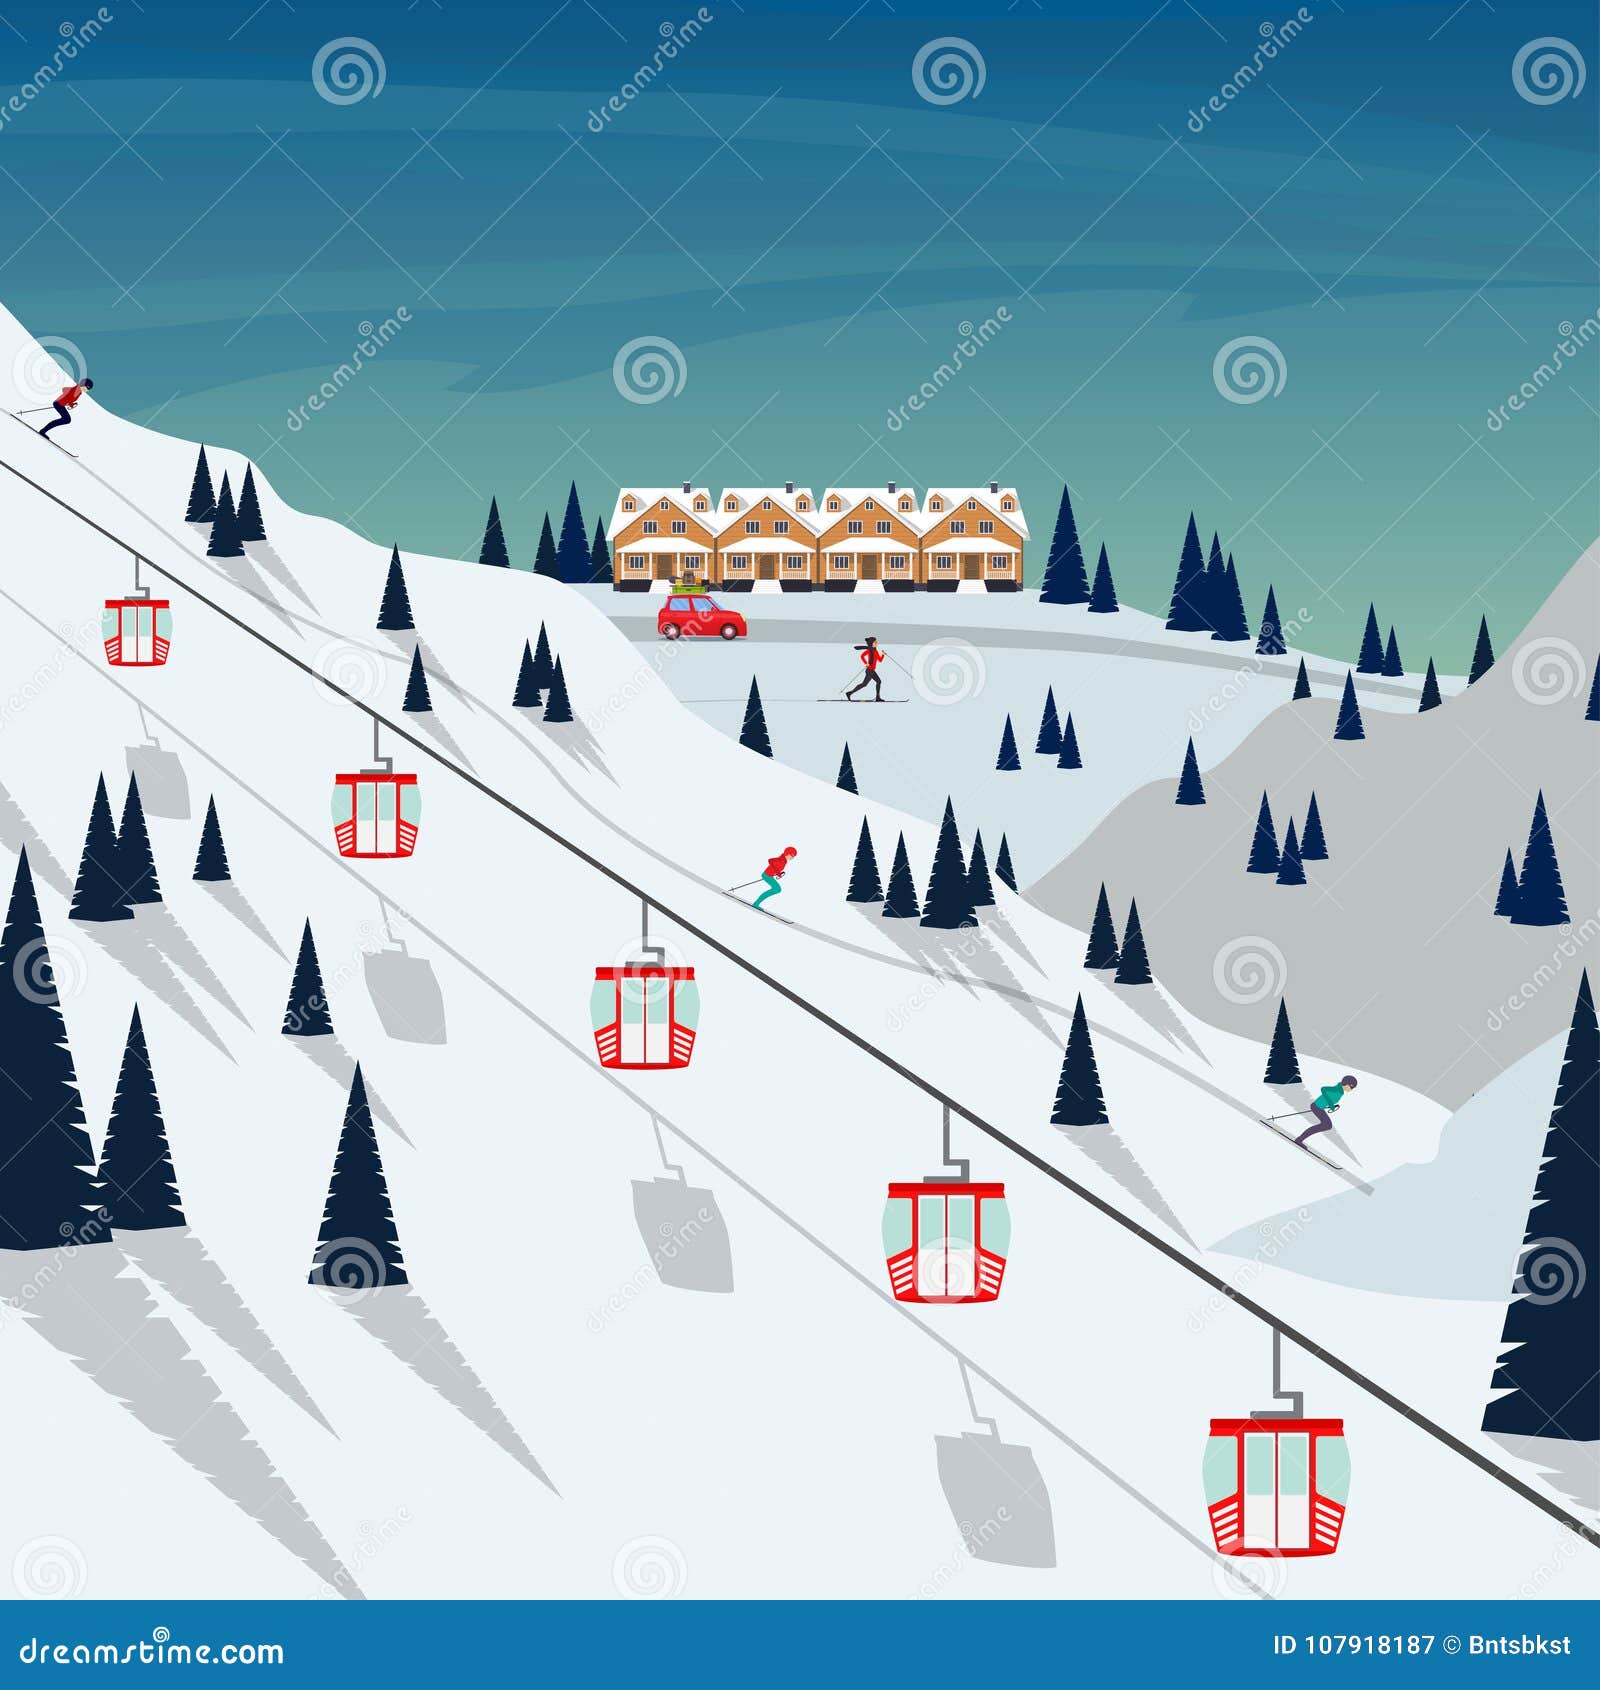 ski resort snow mountain landscape, skiers on slopes, ski lifts. winter landscape with ski slope covered with snow, trees and moun